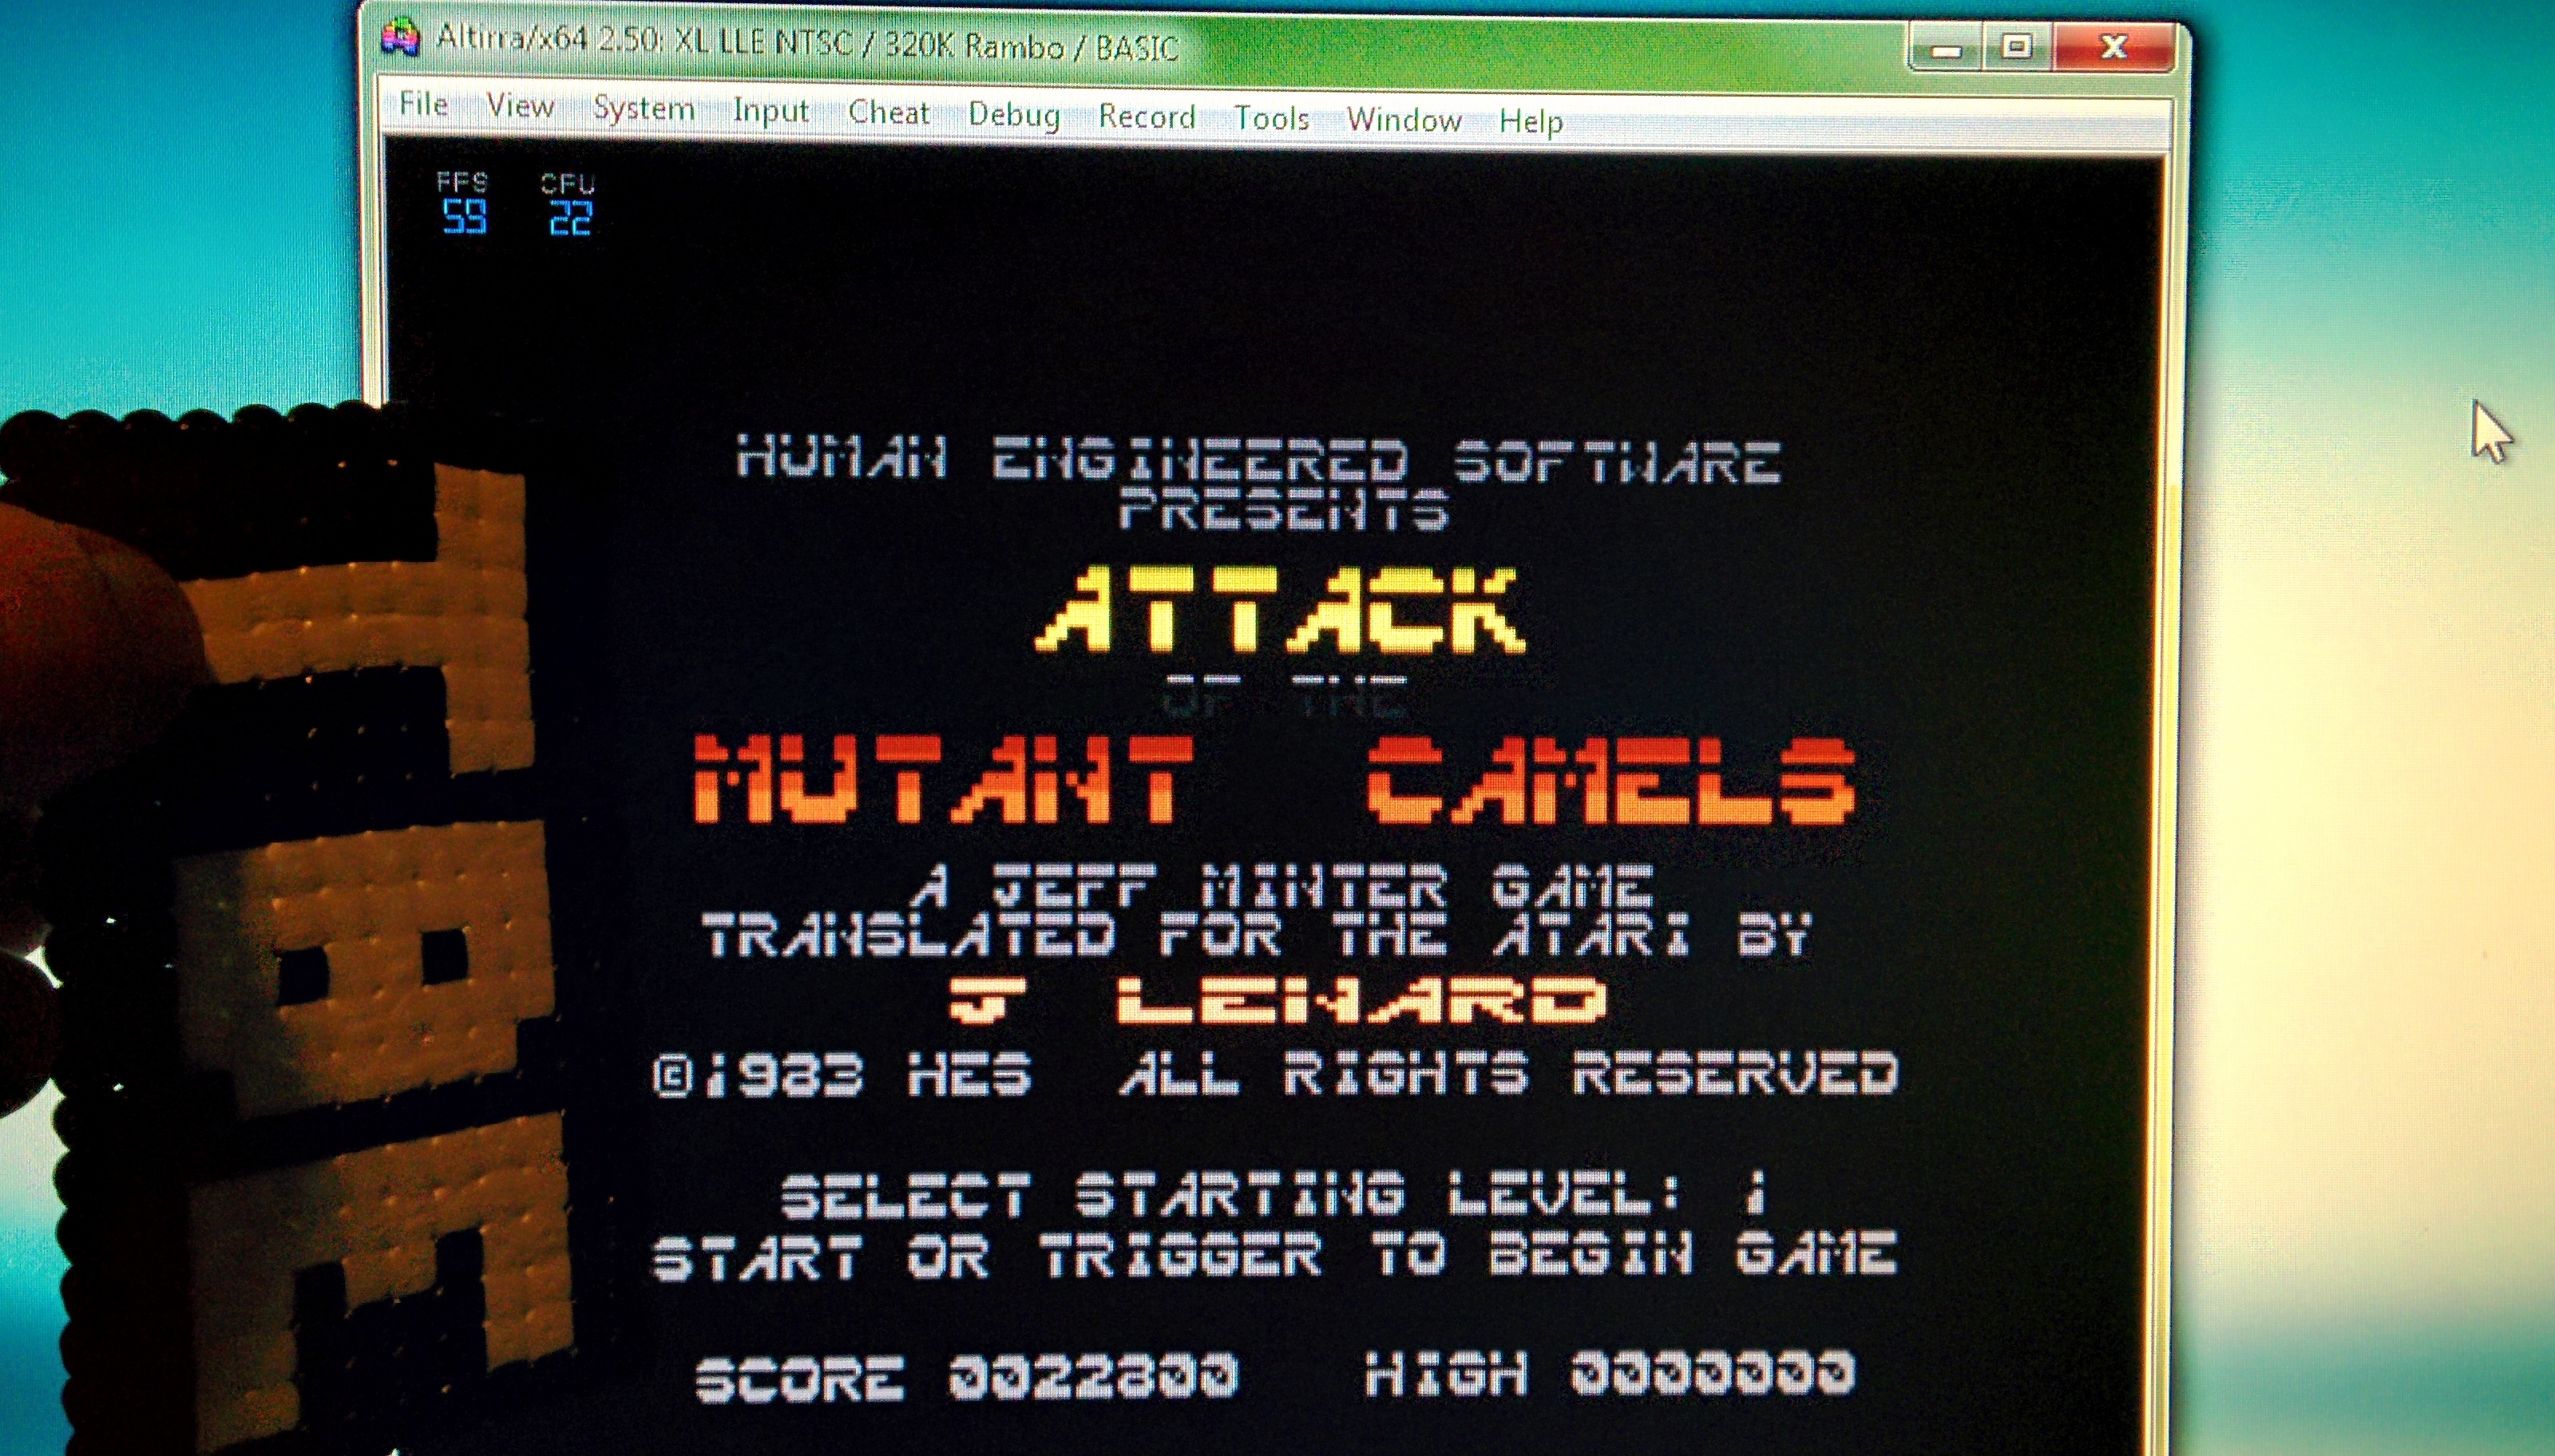 Sixx: Attack of the Mutant Camels (Atari 400/800/XL/XE Emulated) 22,800 points on 2014-10-16 12:25:57